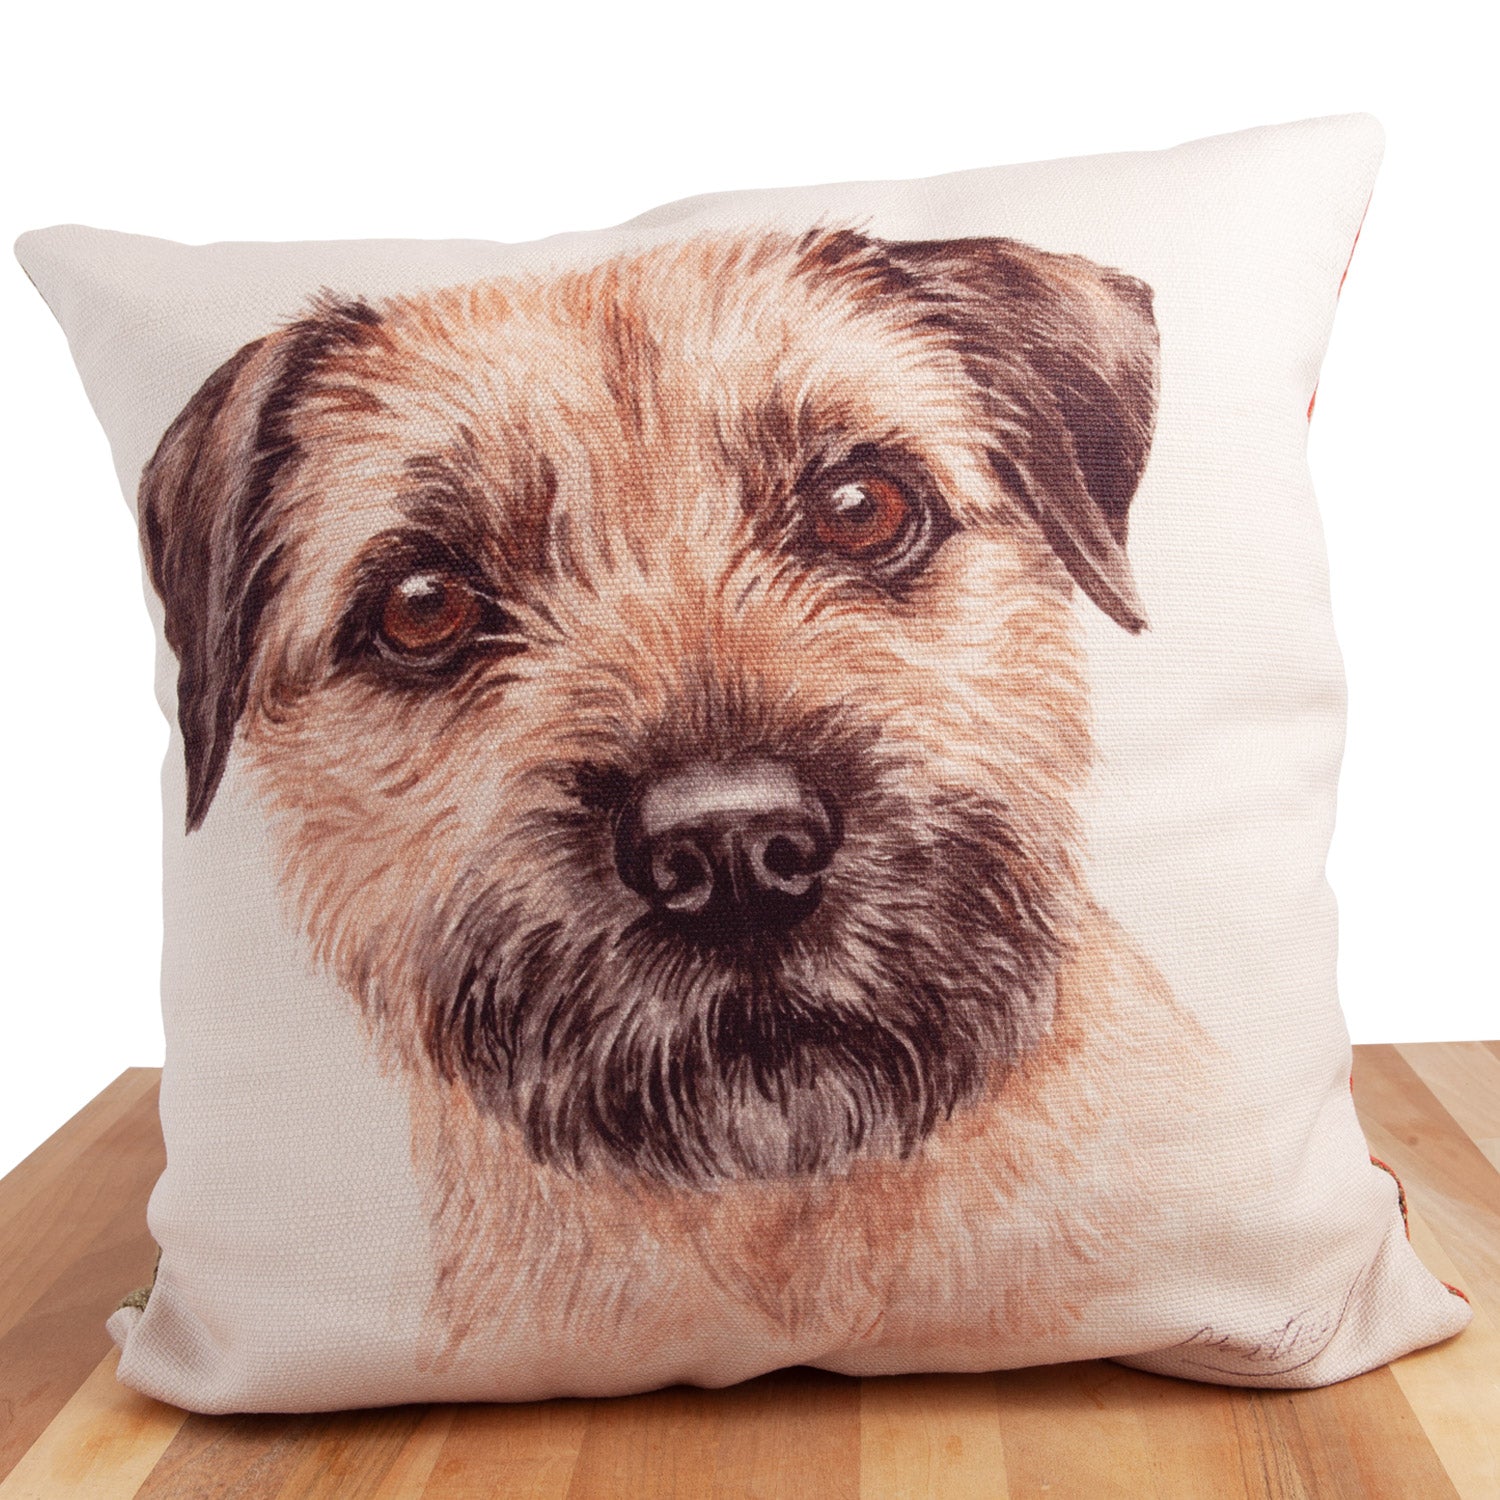 Dog Lover Gifts available at Dog Krazy Gifts. Border Terrier Cushion, part of our Christine Varley collection – available at www.dogkrazygifts.co.uk